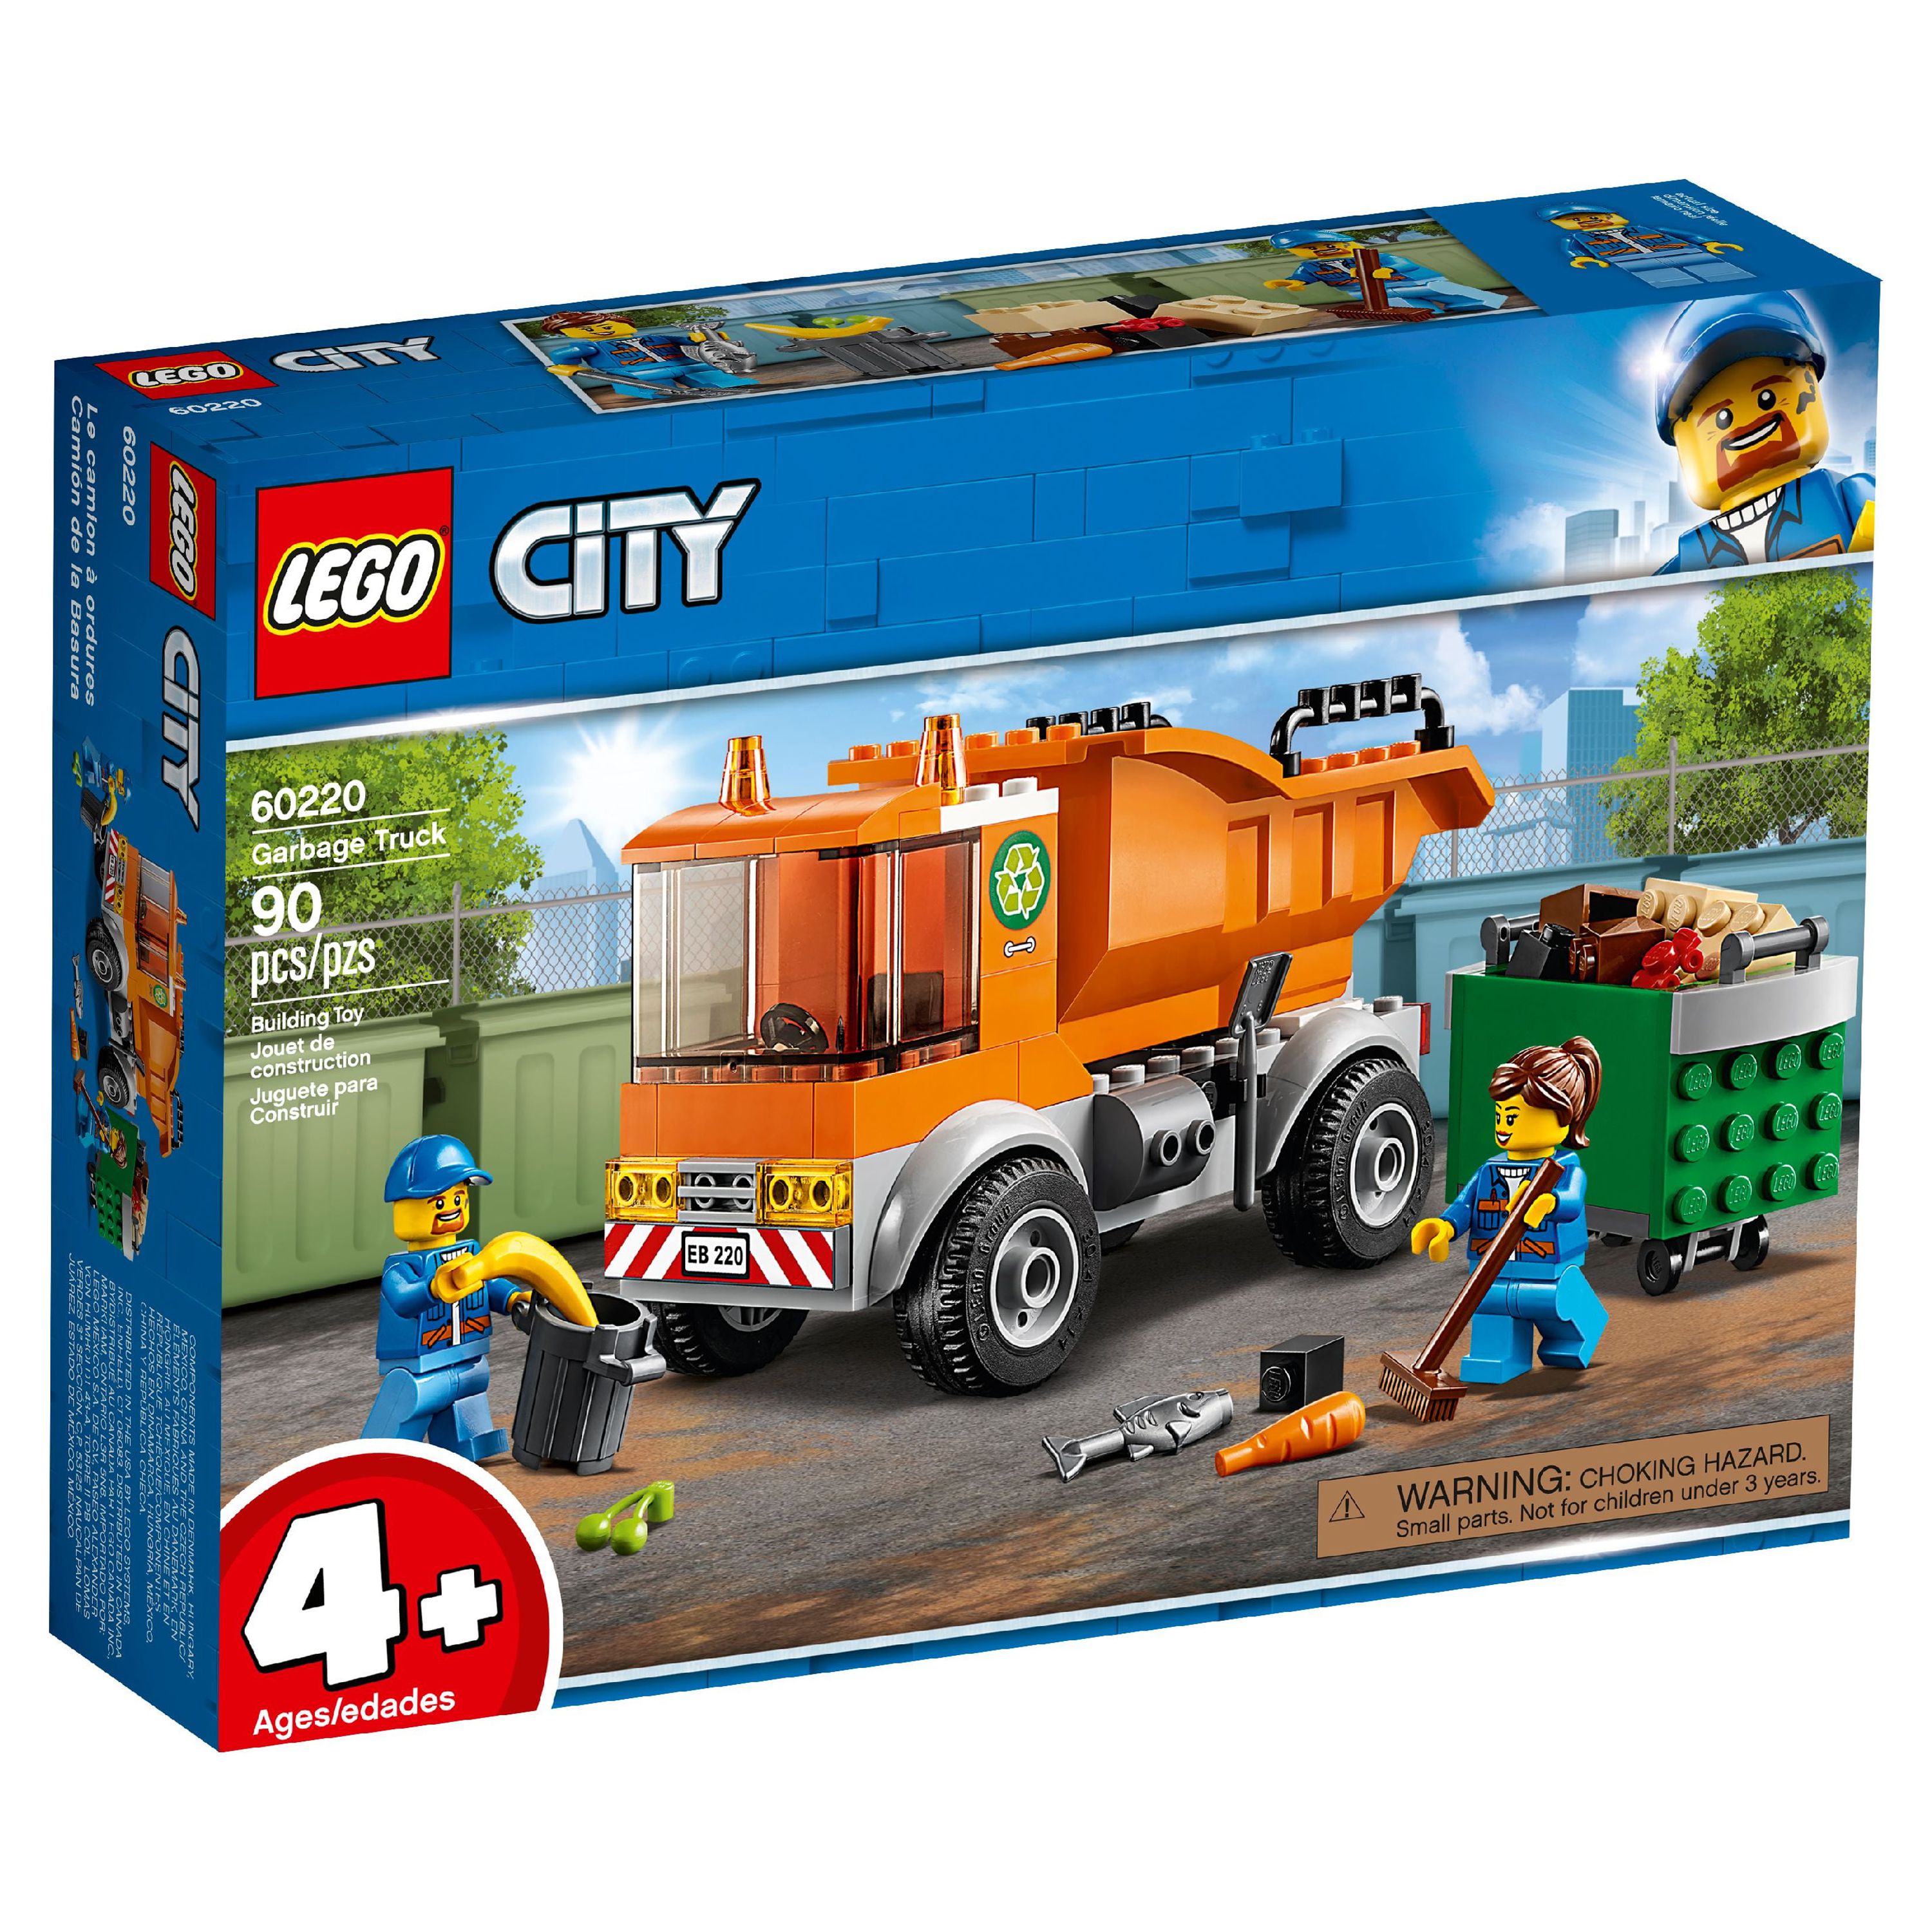 LEGO City Great Vehicles Garbage Truck 60220 - image 5 of 8